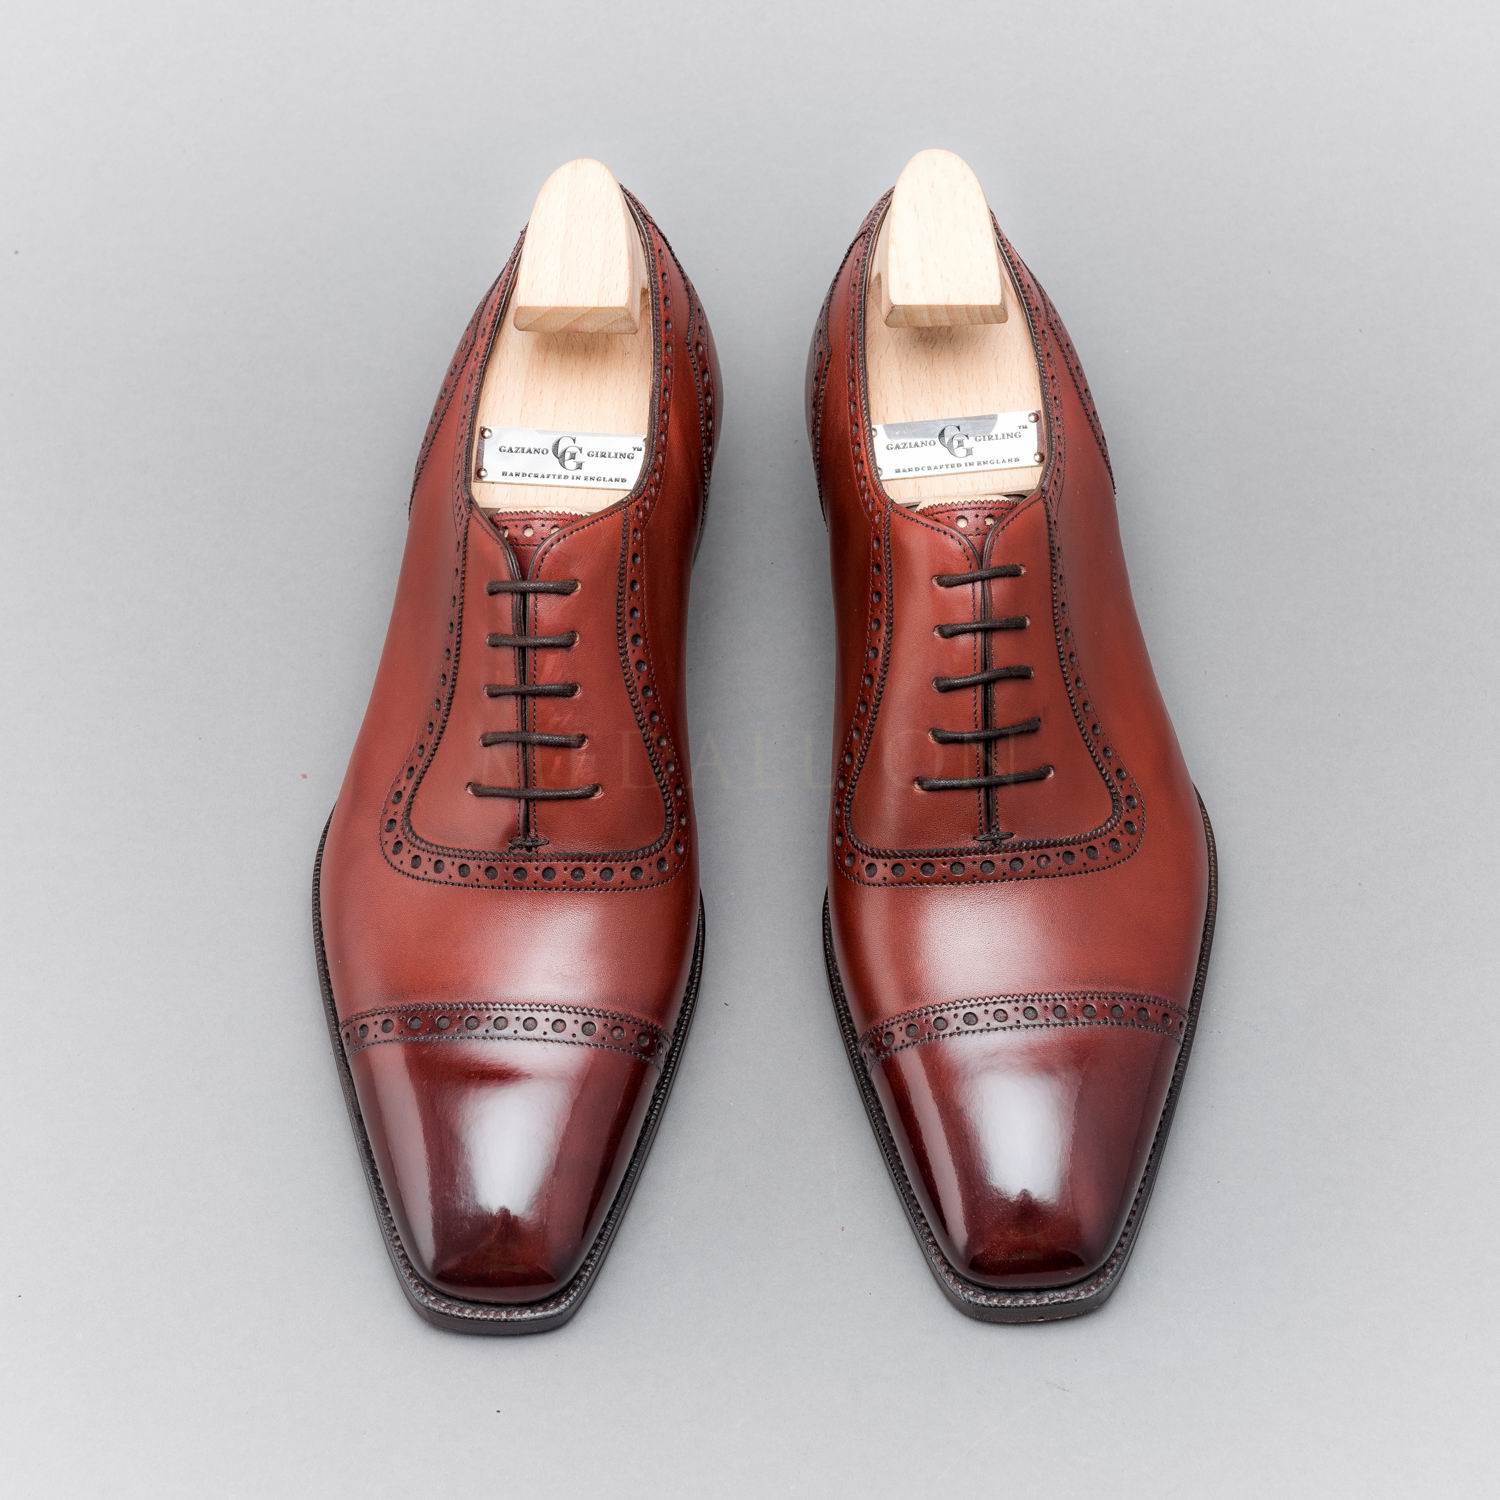 Gaziano&Girling, St James II, Adelaide Oxford, England – Medallion Shoes